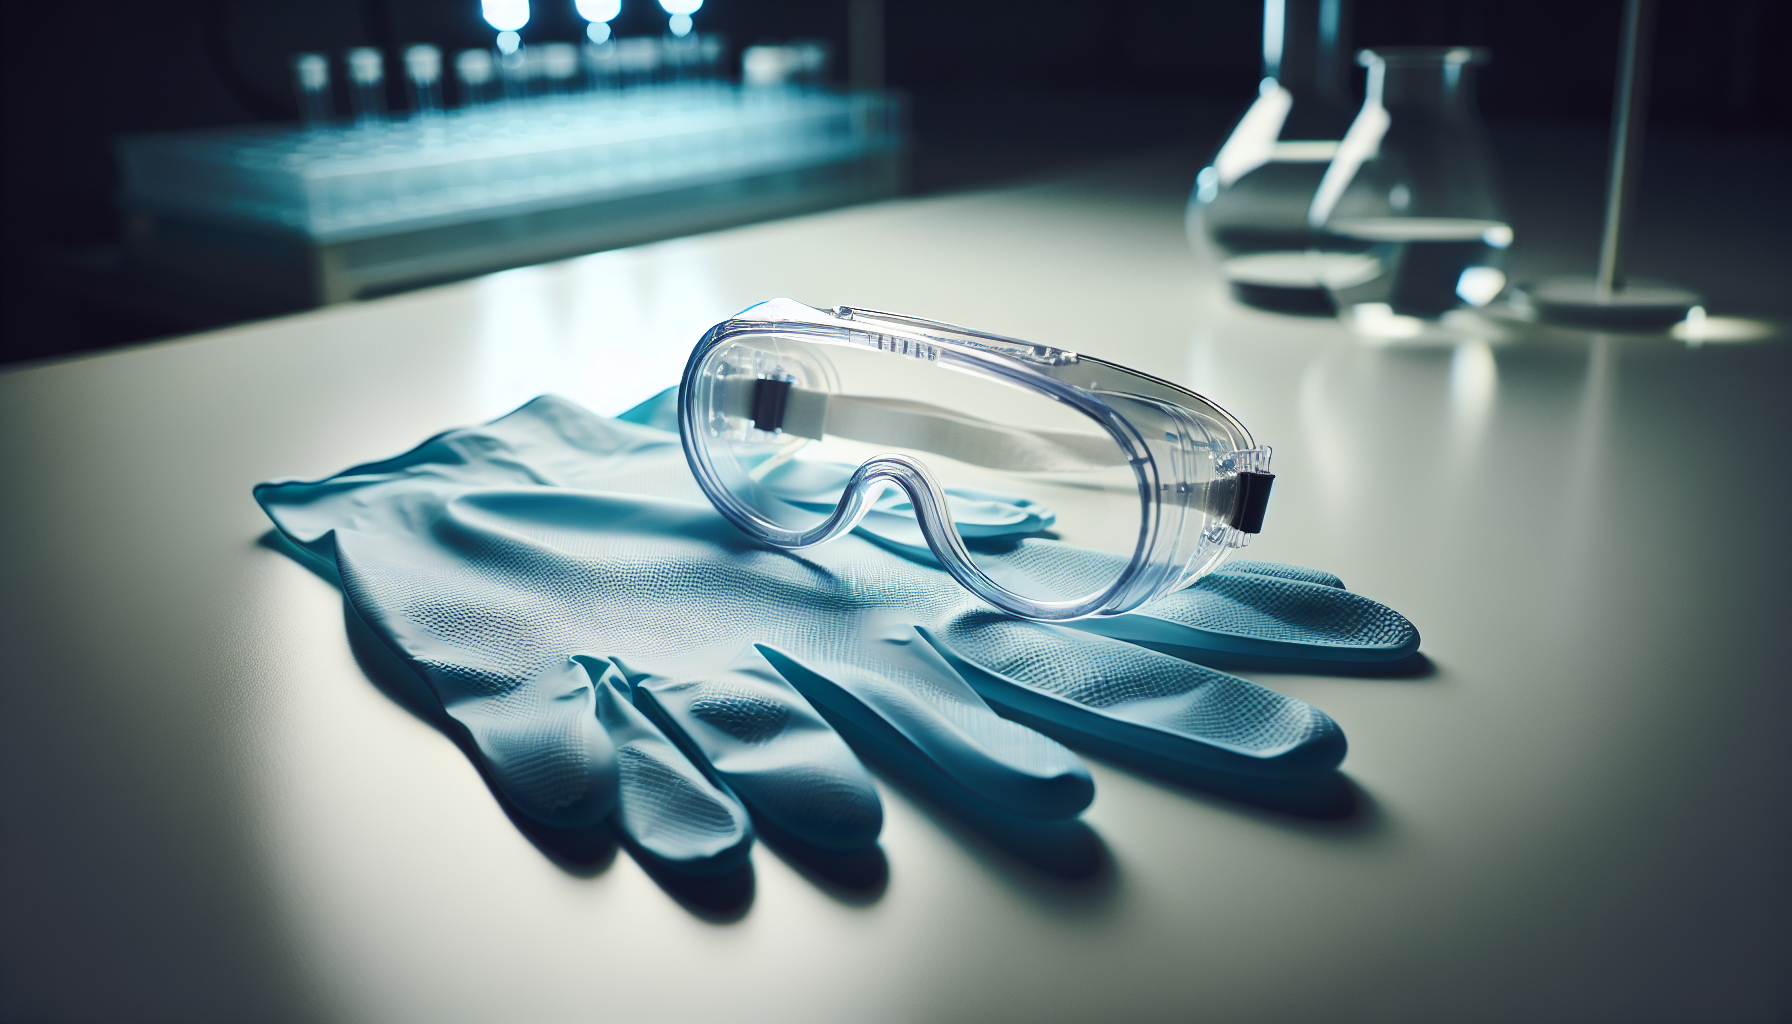 Safety goggles and gloves for protection during lab work